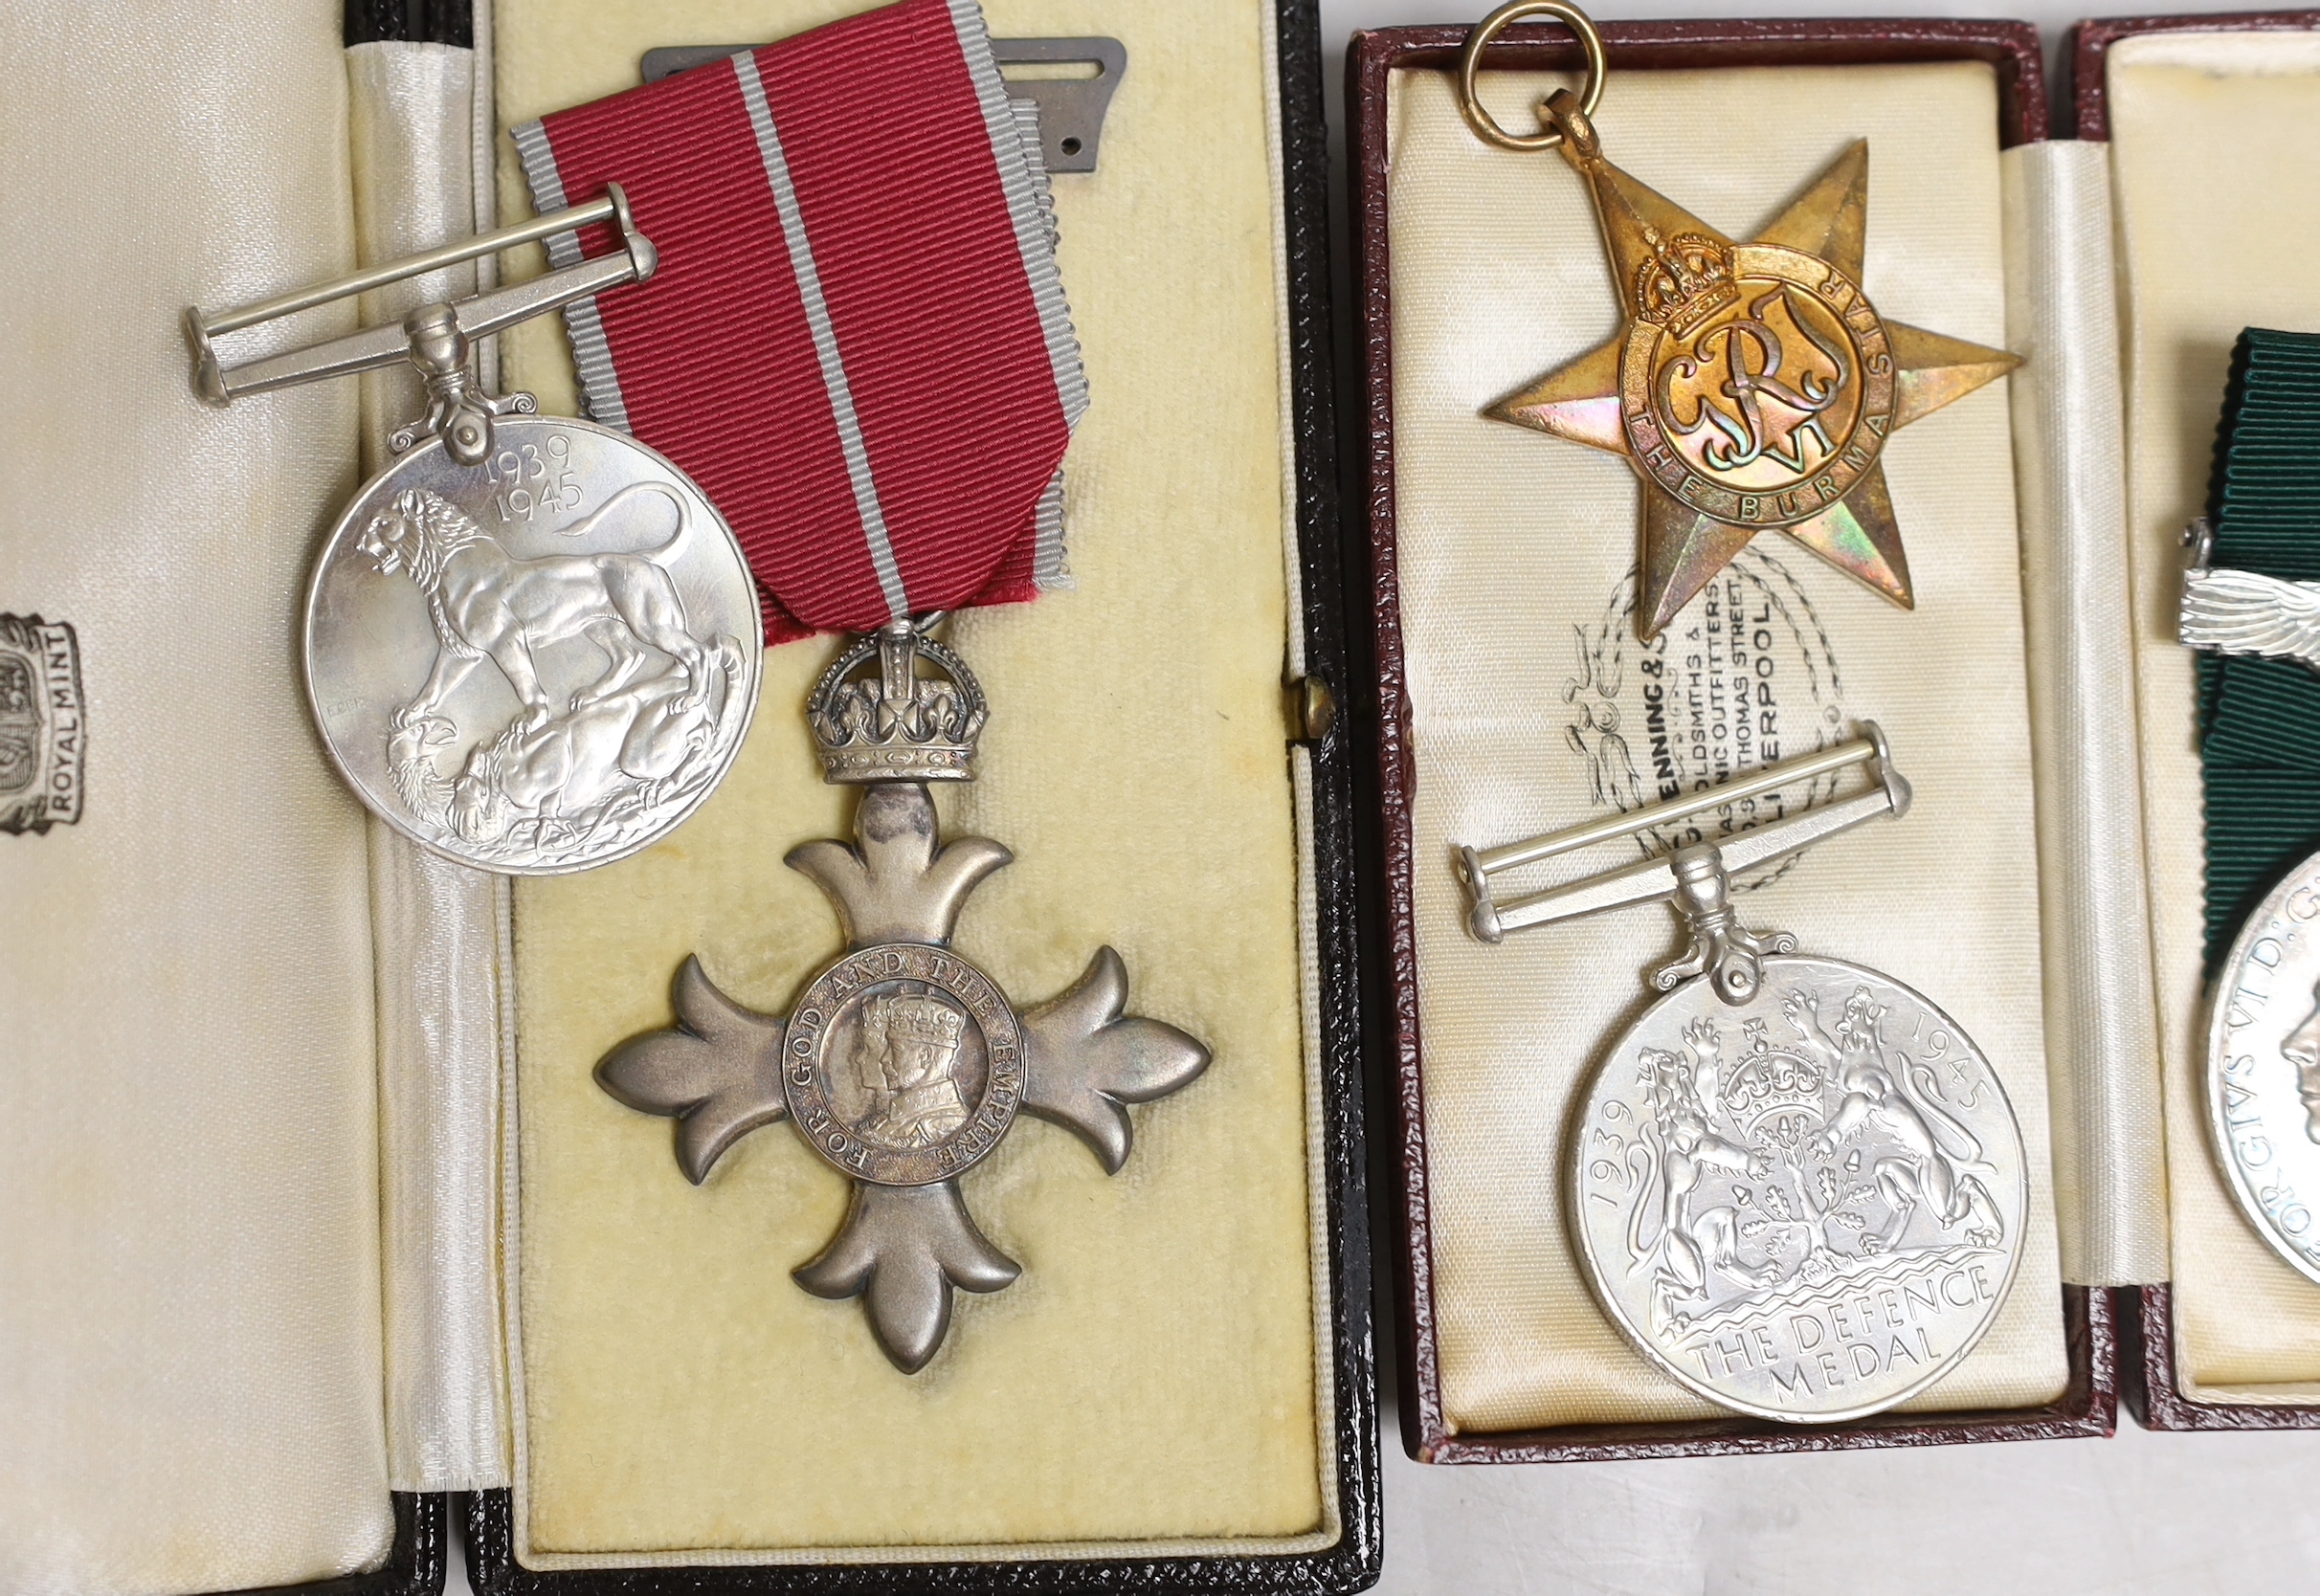 Squadron Leader W. Kenworthy medals, comprising a George V MBE (military) numbered 86759, a George VI Air Efficiency award (as acting Squadron Leader RAFVR) together with a World War II trio